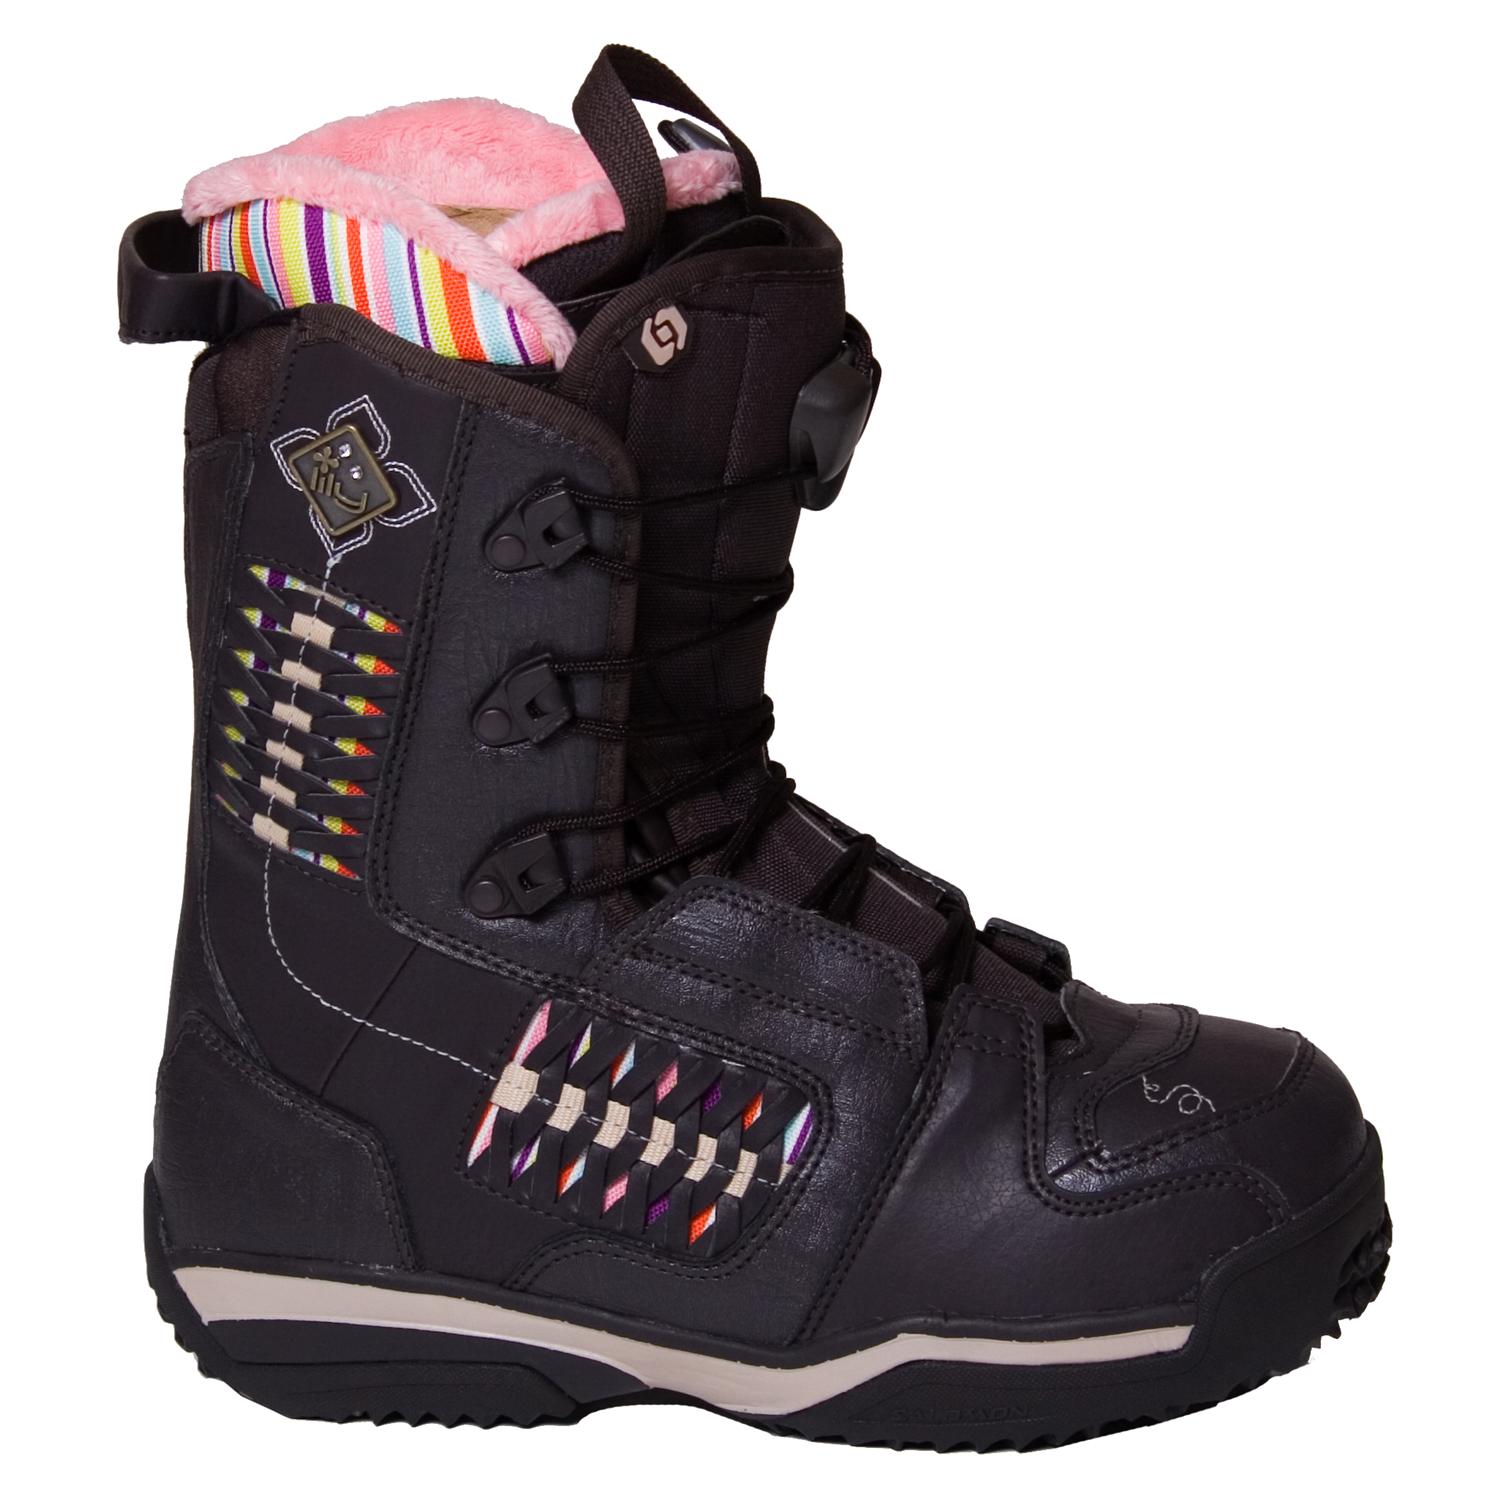 Salomon Lily Snowboard Boots - Women's 2009 | evo outlet